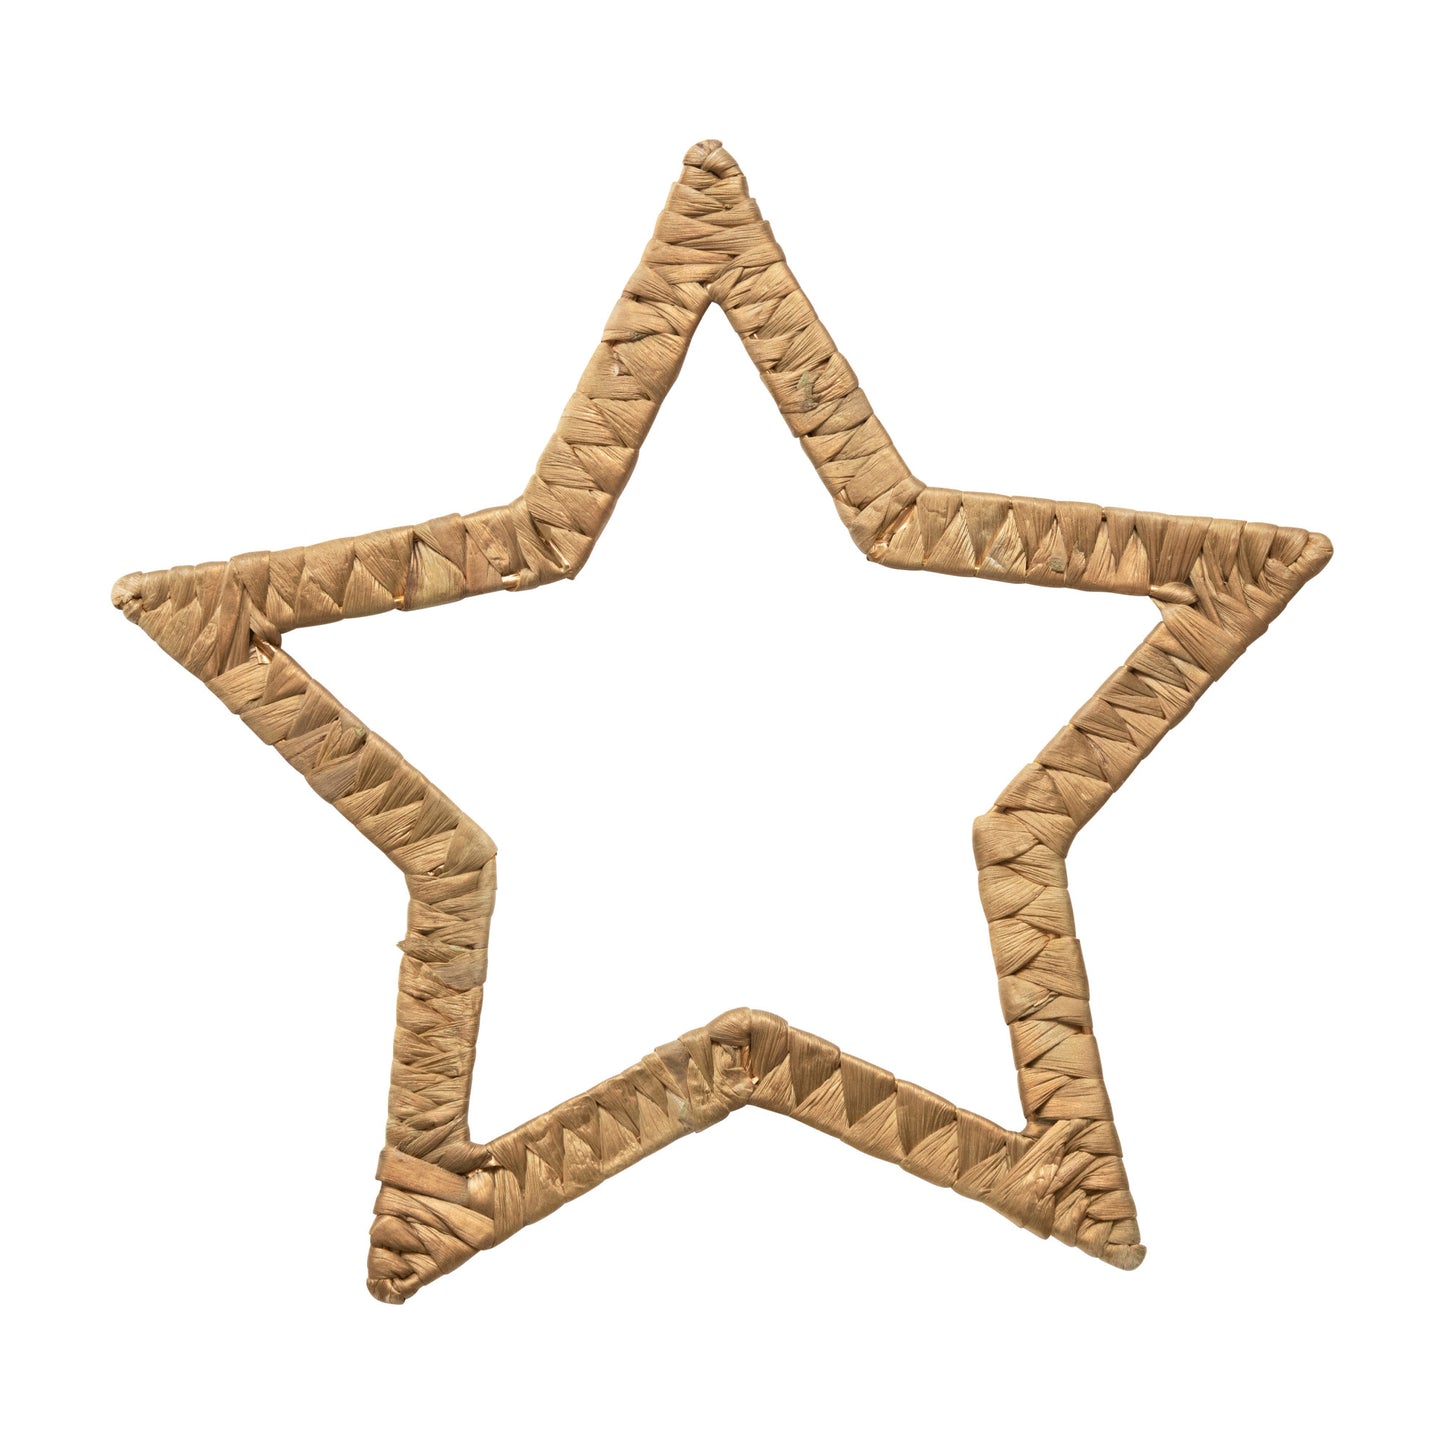 Hand-Woven Water Hyacinth Star - Gold Color - 17-3/4-in - Mellow Monkey